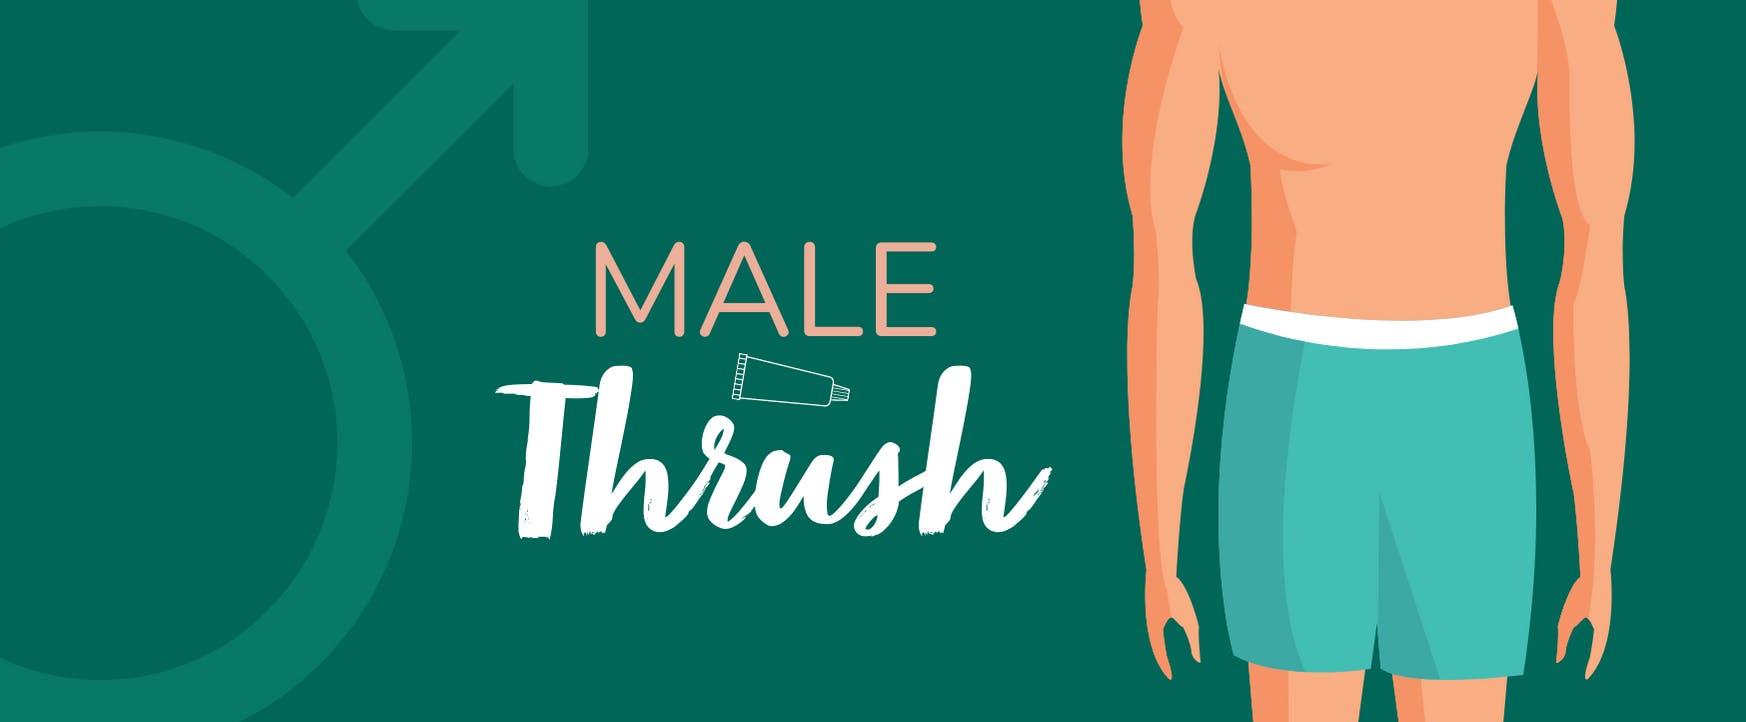 Cartoon image of man with Male Thrush text